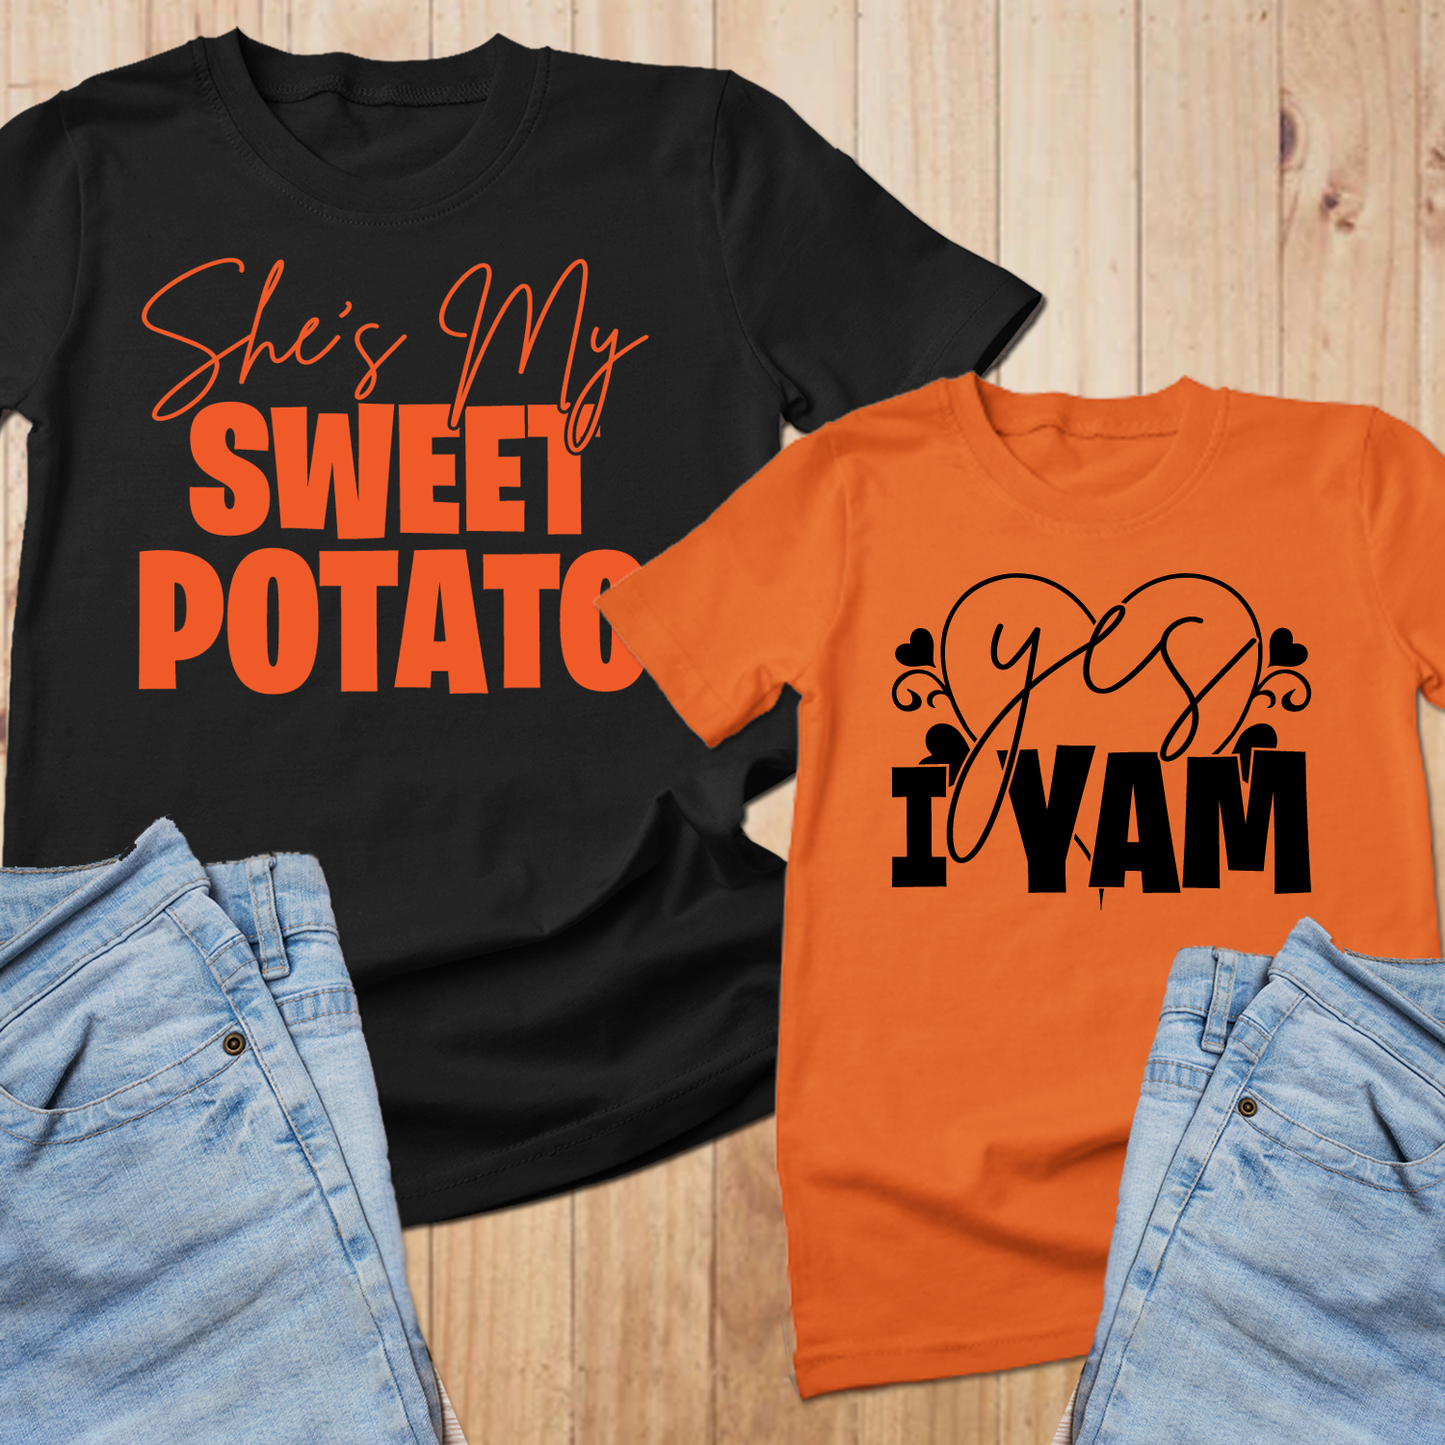 She's My Sweet Potato, Yes I Am thanksgiving sweatshirts for couples, couple thanksgiving shirt, thanksgiving couple shirts - Wilson Design Group